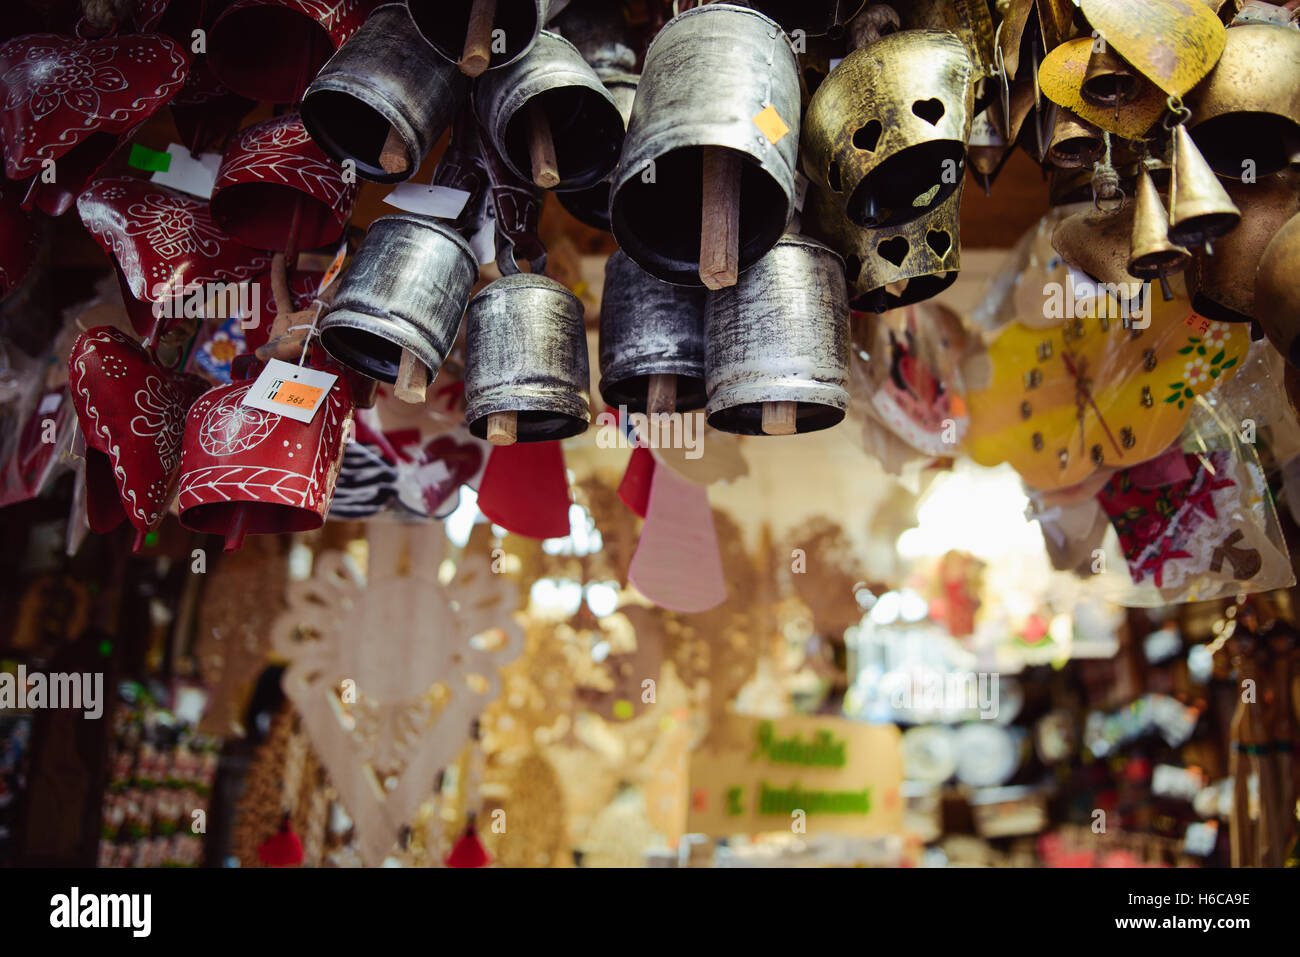 Cow bells in the shop, souvenir from Poland Stock Photo